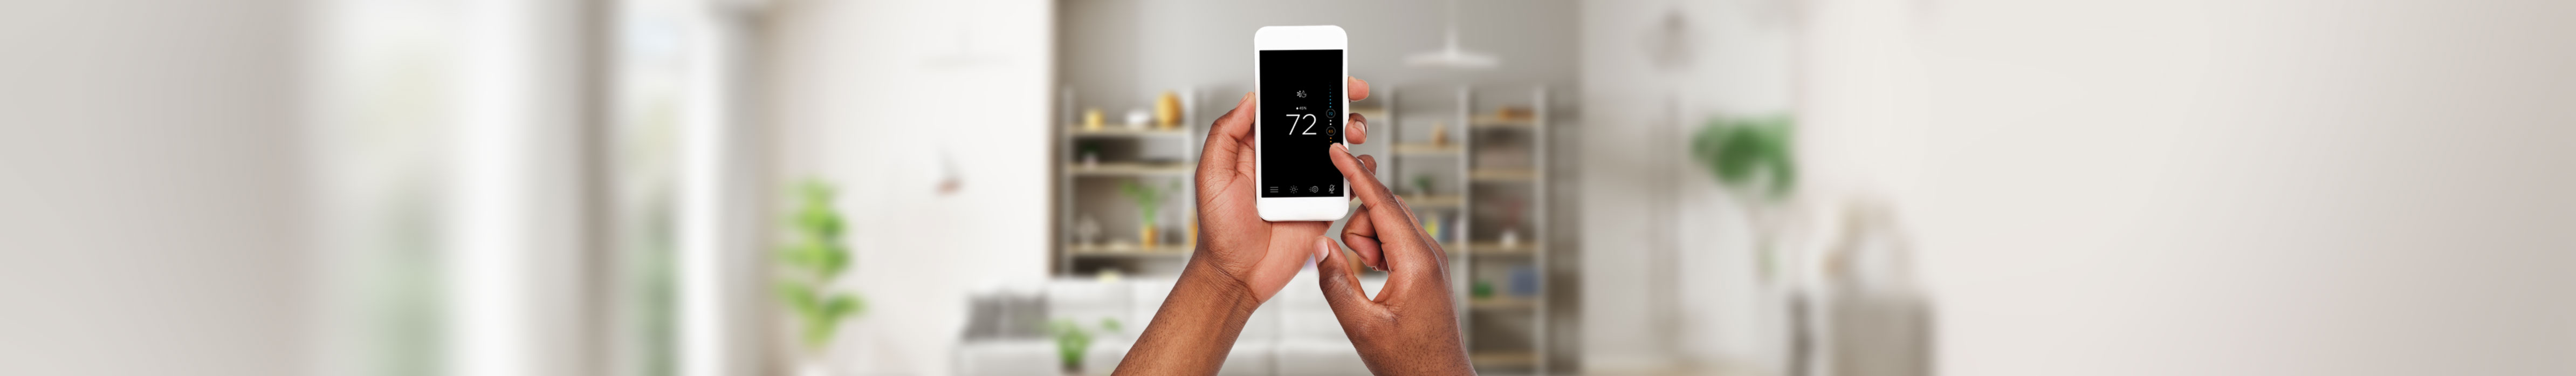 50-smart-device-or-thermostat-rebate